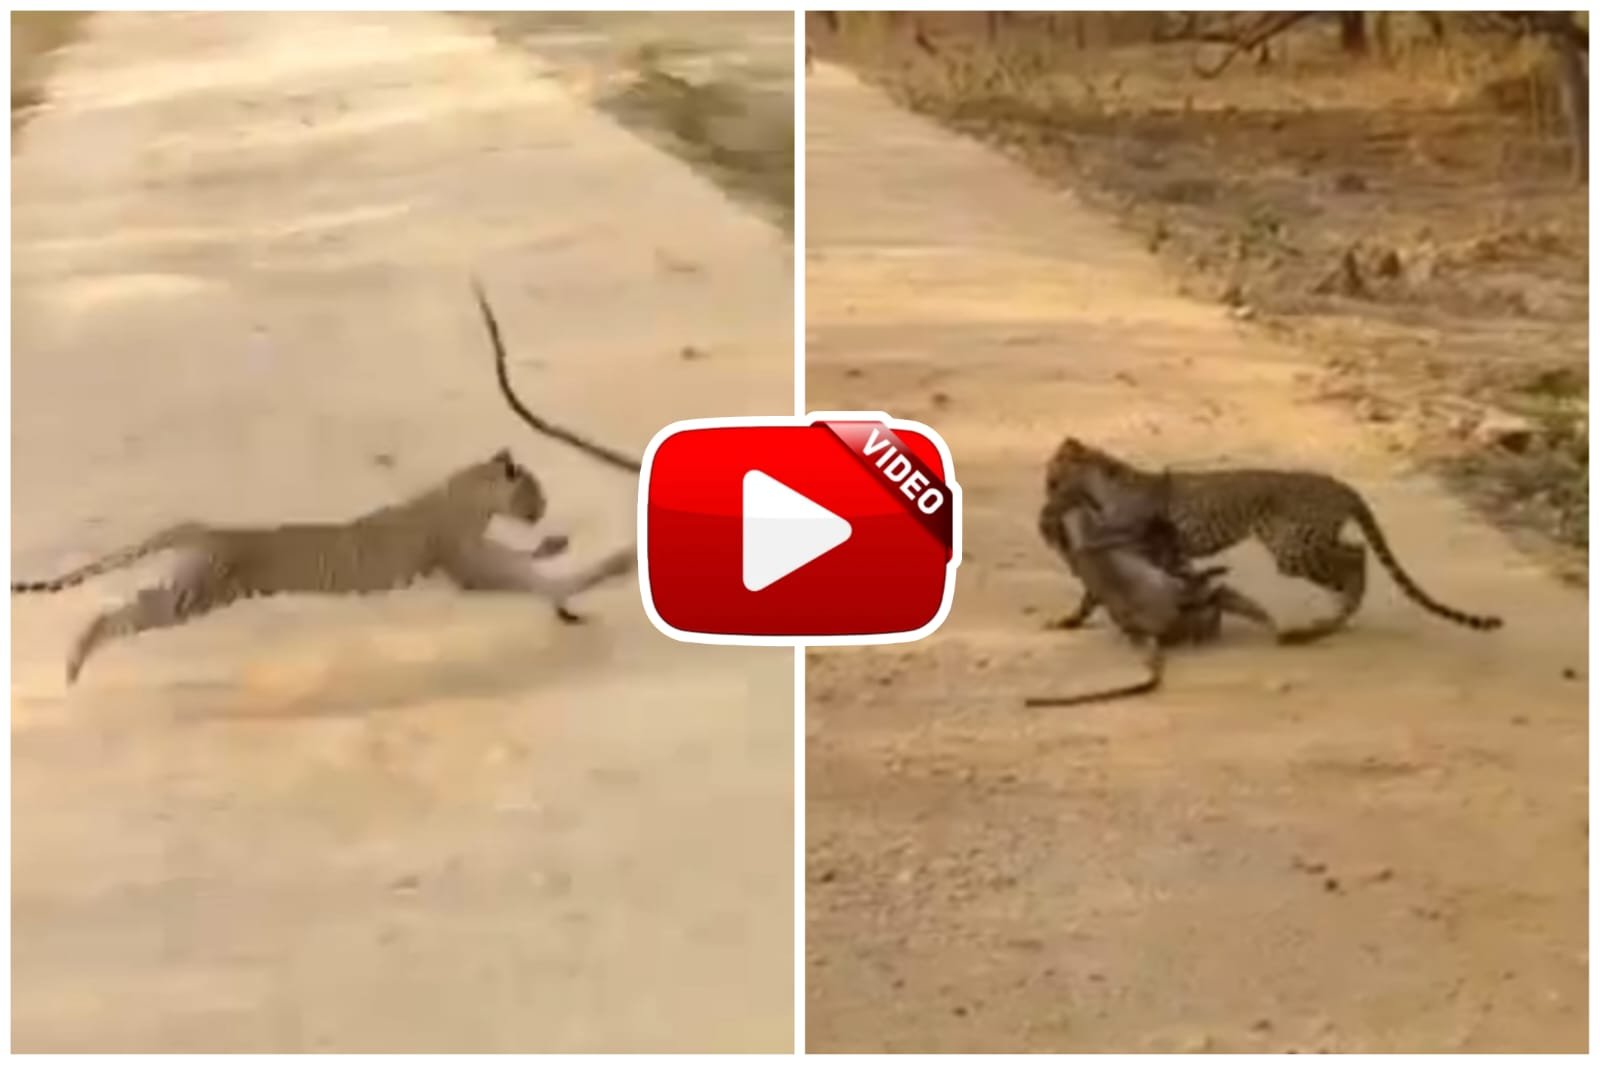 Video of Bandar and Leopard | The leopard came at high speed and took away the prey of the monkey.